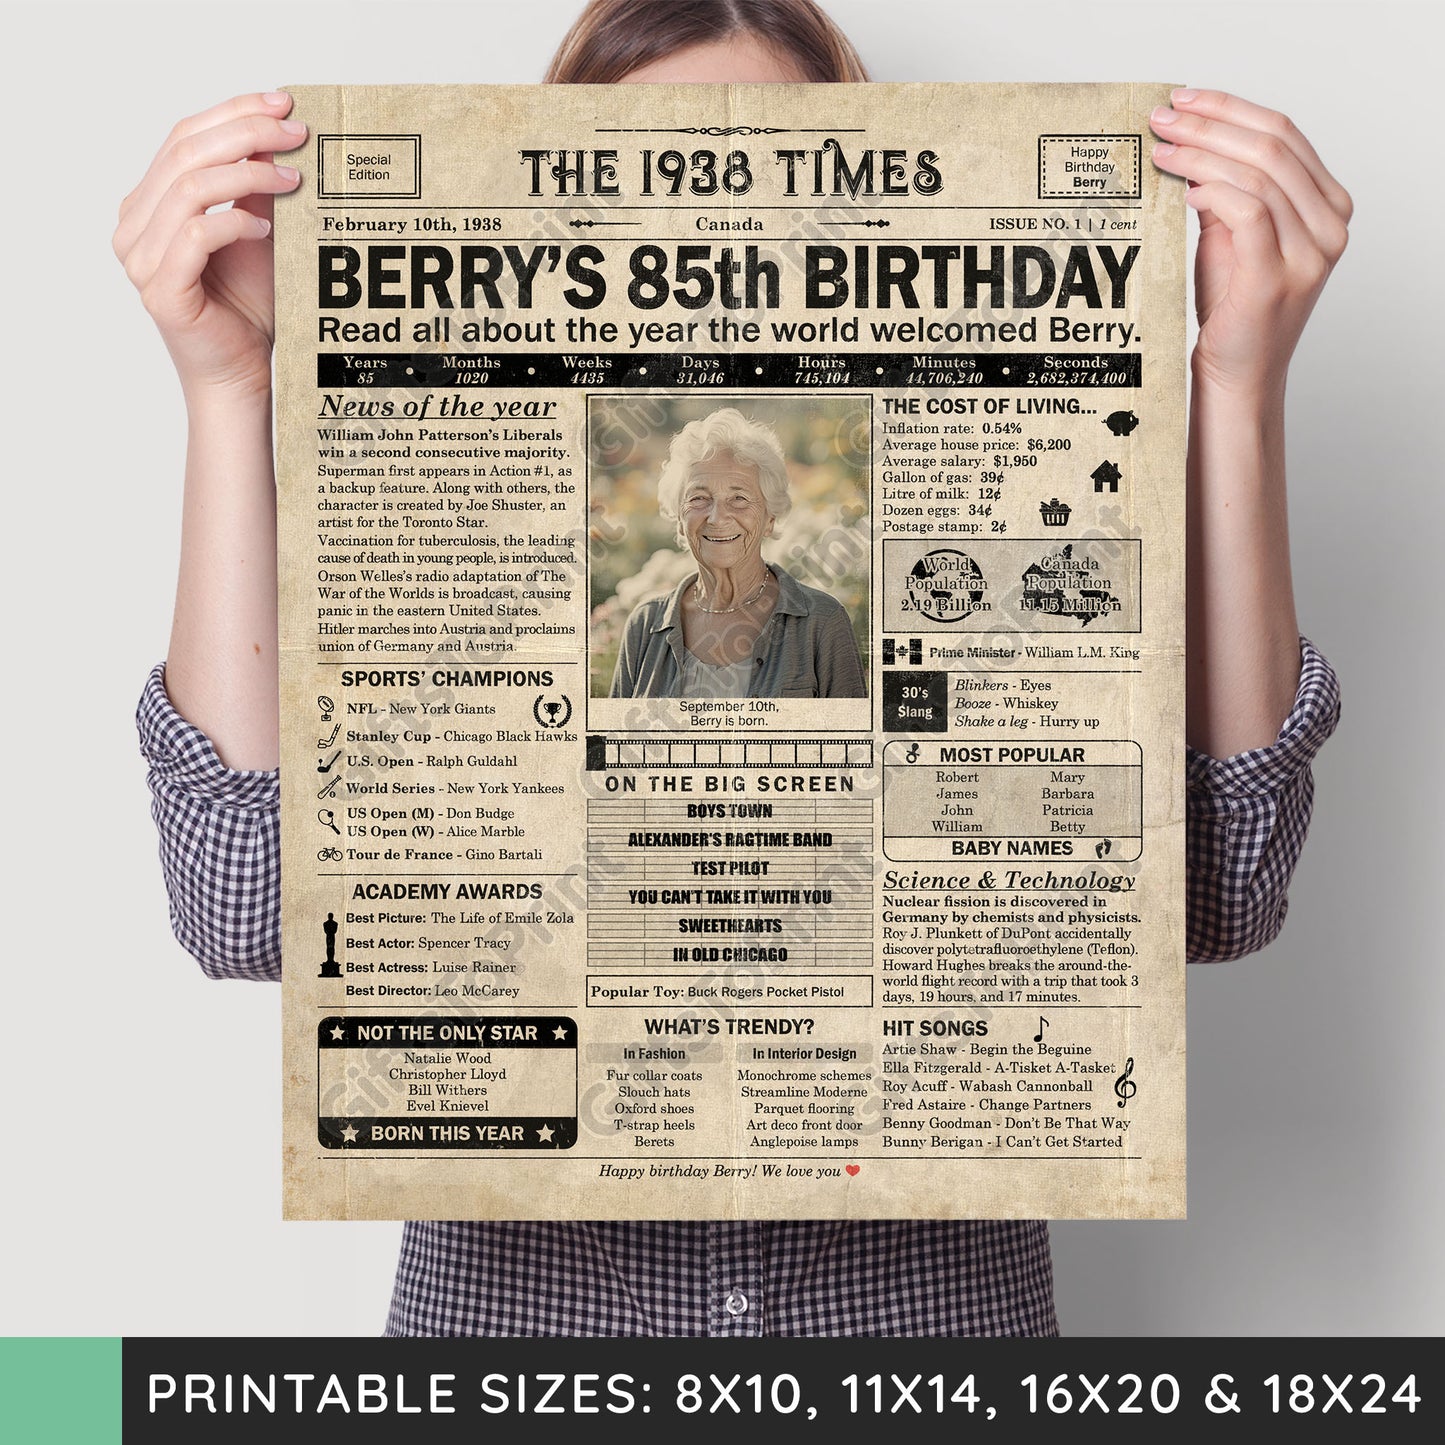 Personalized 85th Birthday Gift: A Printable CANADIAN Birthday Poster of 1938